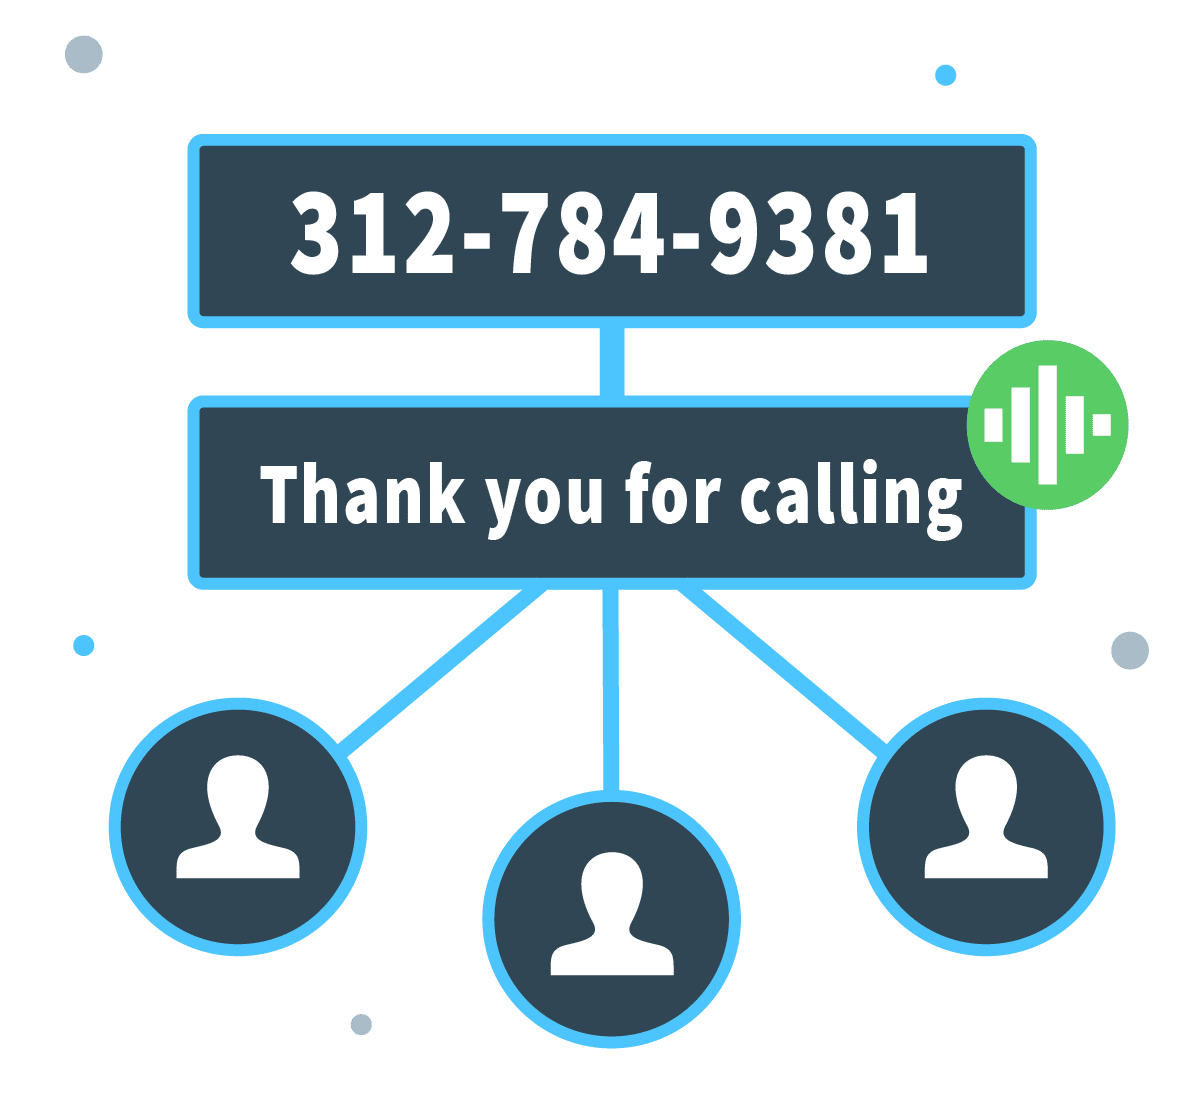 Best Priced VoIP for Small Business (Cheap but High-Quality)